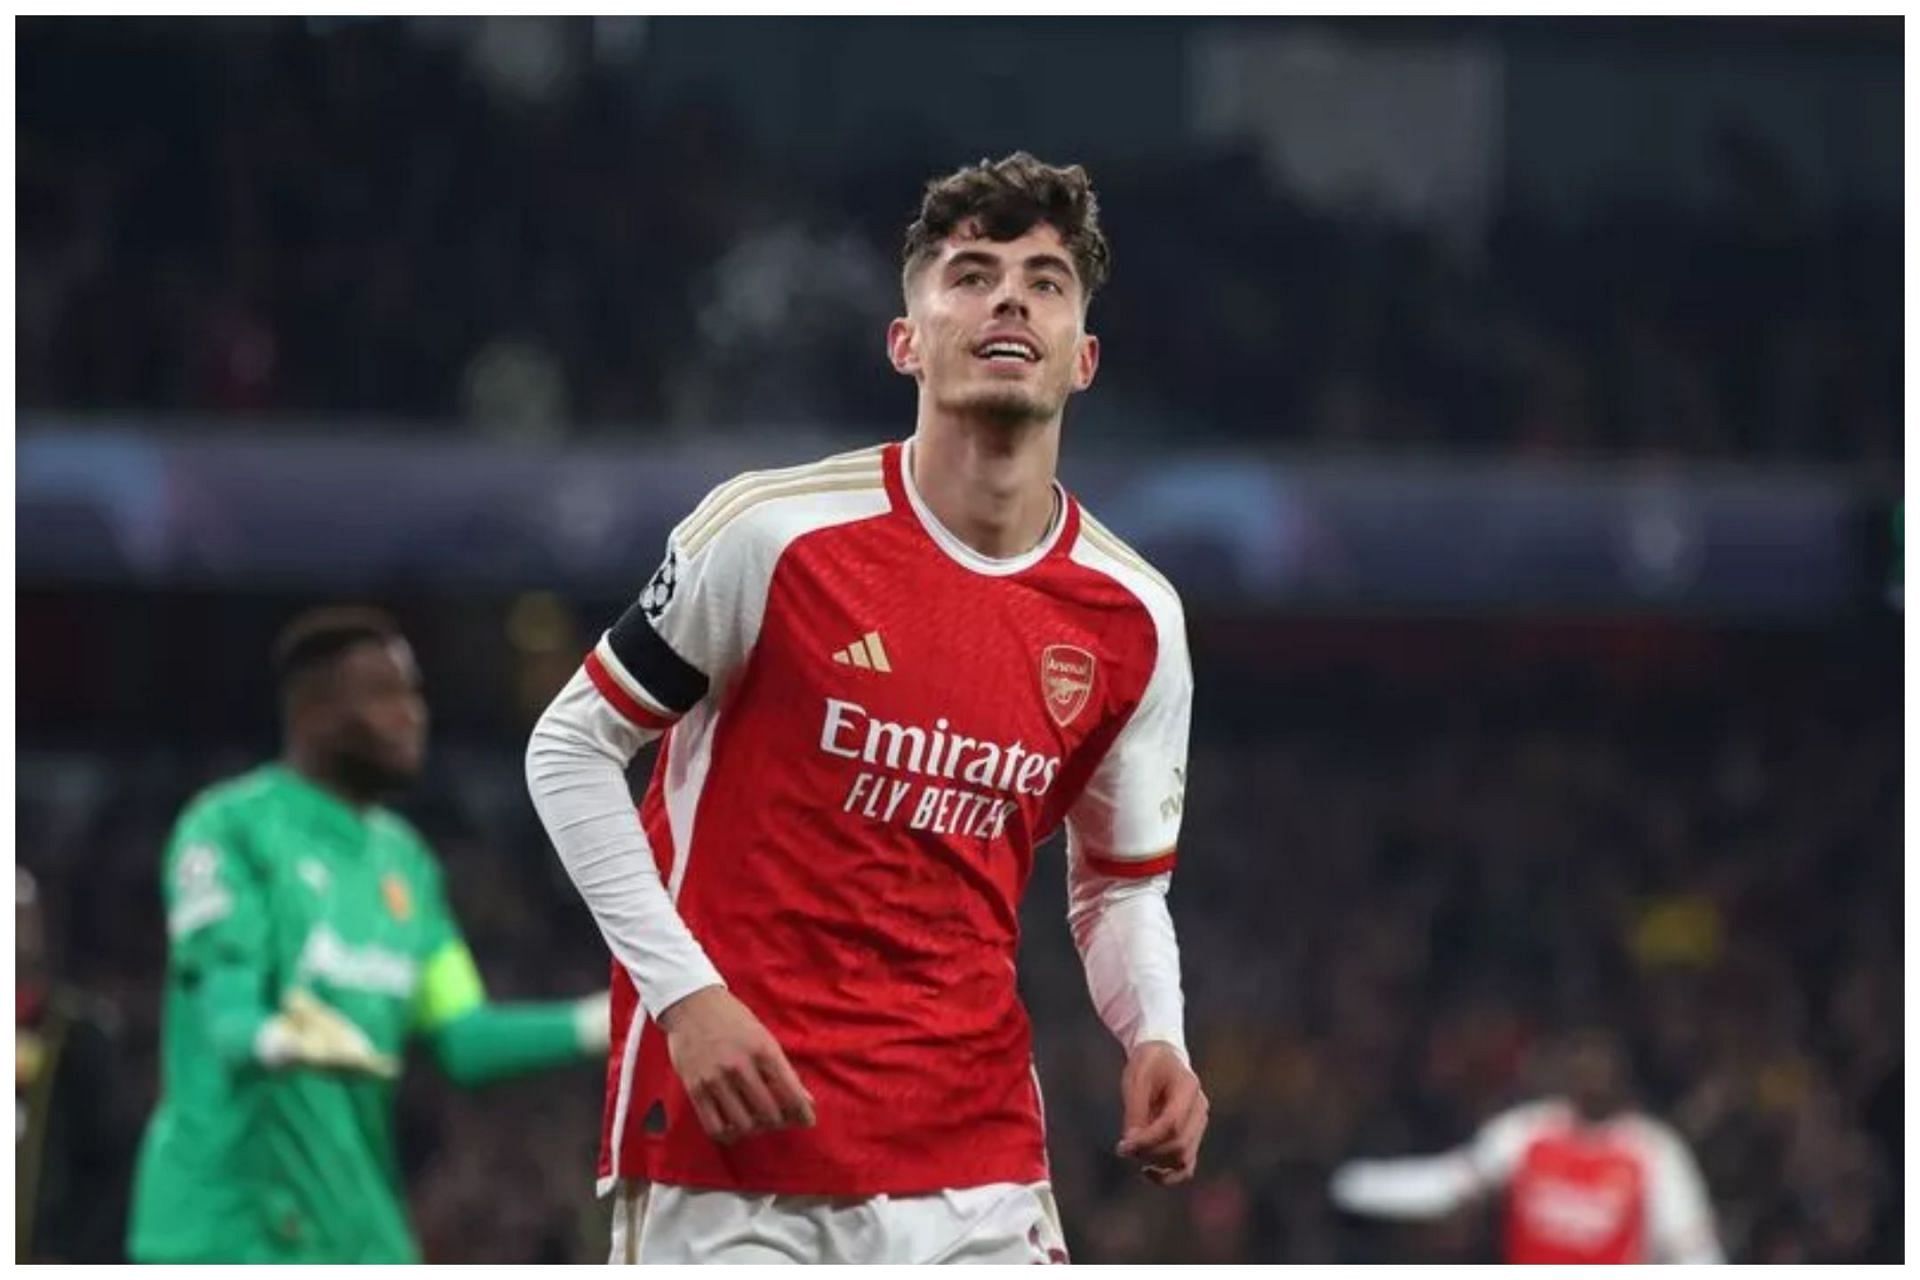 Kai Havertz and Arsenal are fighting for the English Premier League title (Photo by Rob Newell - CameraSport via Getty Images)